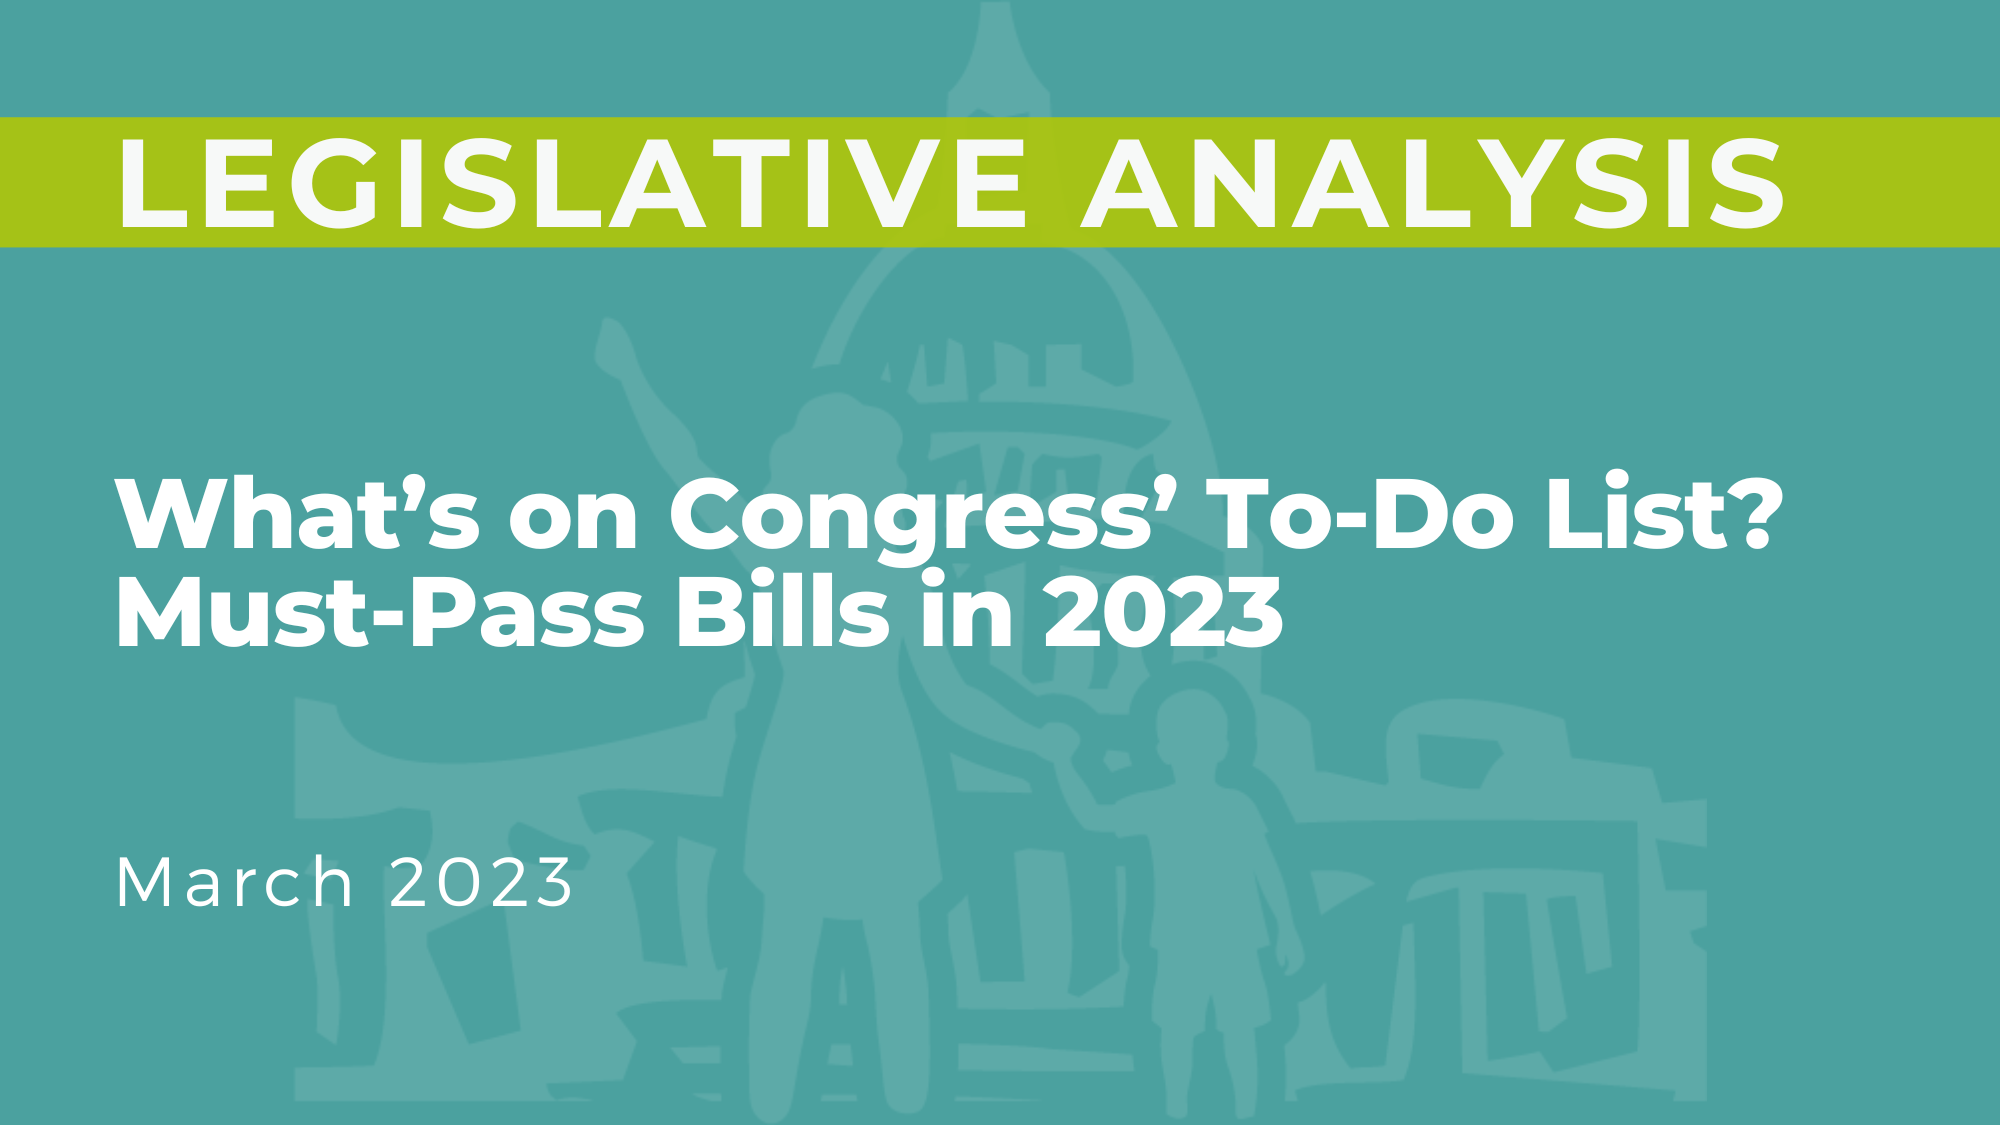 What's on Congress' To-Do List? Must-Pass Bills of 2023